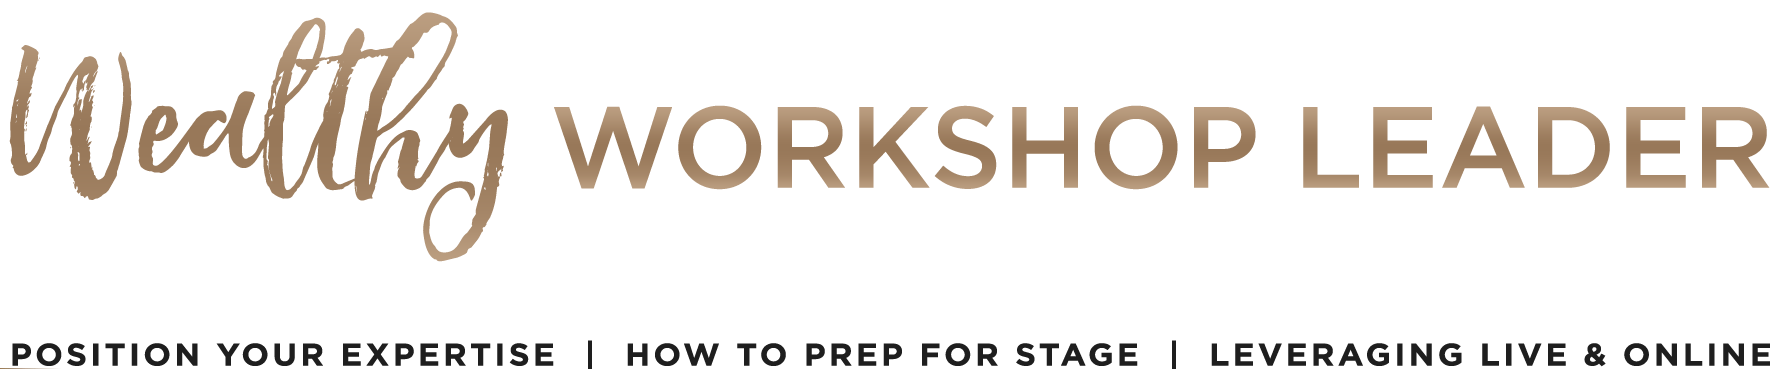 Wealthy Workshop Leader Event Experts Livestream | Position your expertise | How to prep for stage | Leveraging Live & Online